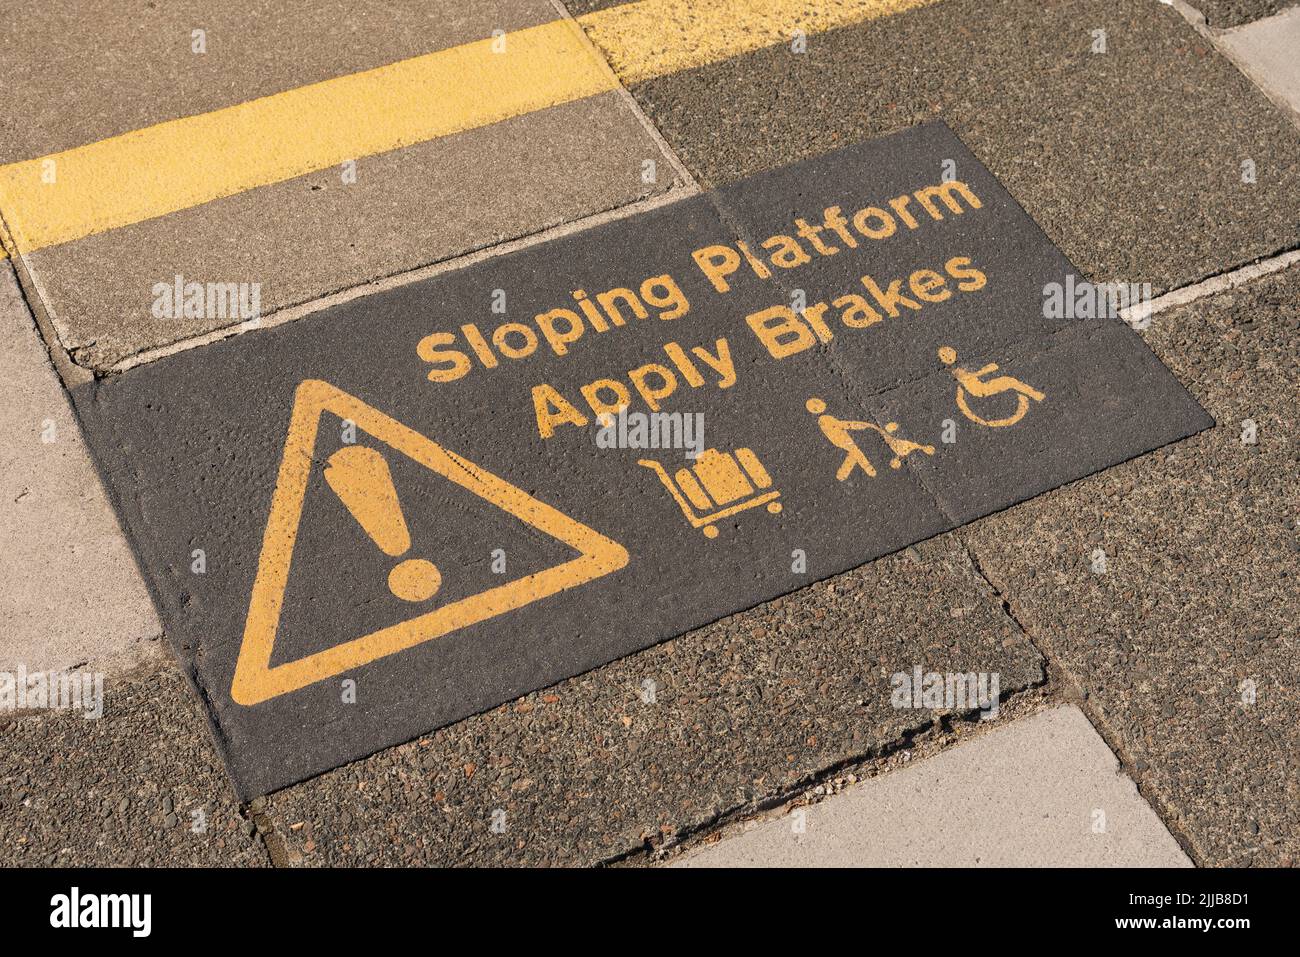 St Erth, Cornwall, England, UK. 2022. Warning sign  of a sloping platform surface to passengers using wheelchairs, trolleys and pushchairs at St Erth Stock Photo